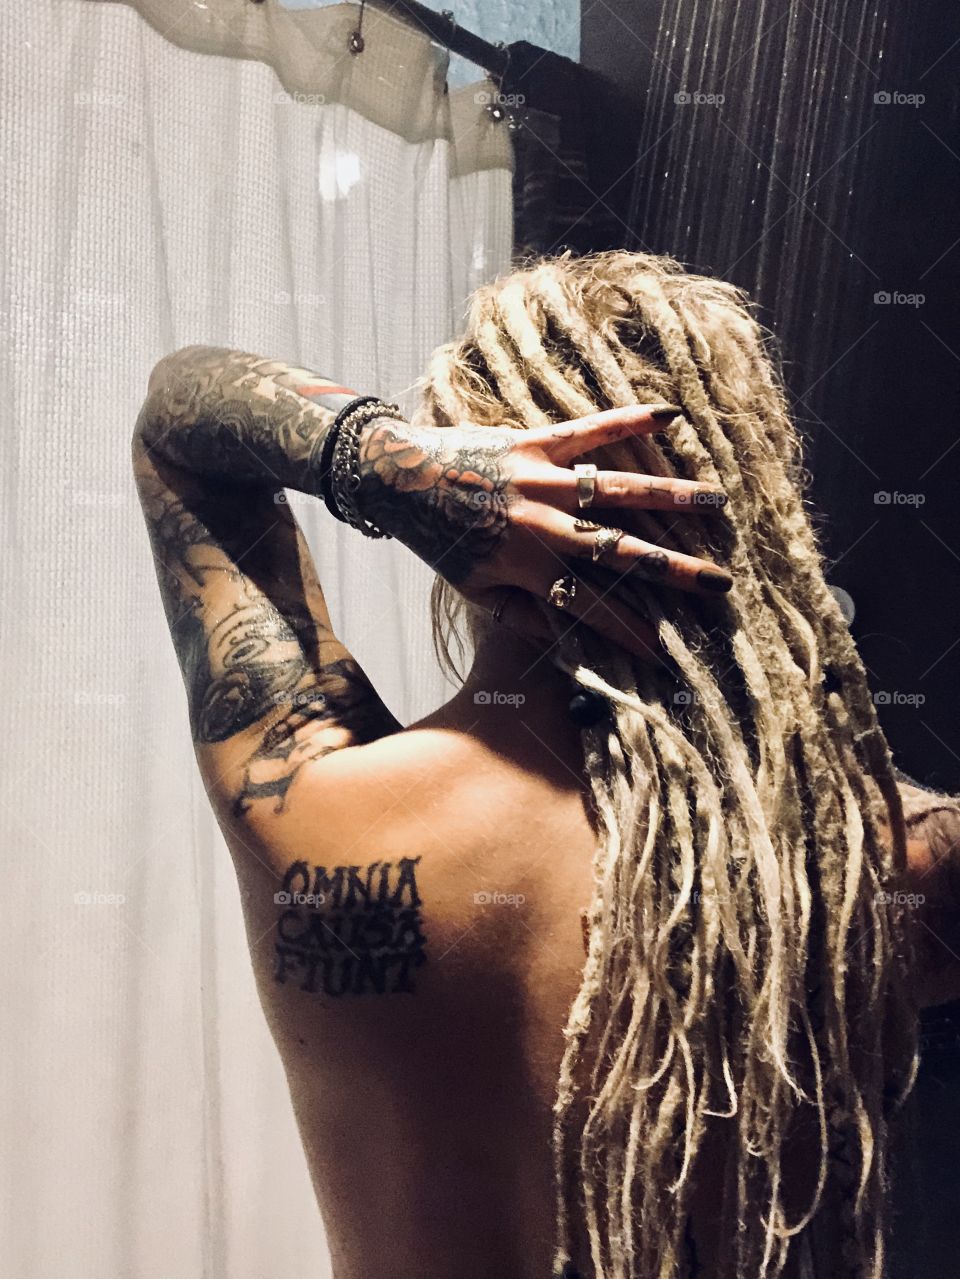 Foap Com Blonde Girl With Dreadlocks And Tattoos Takes A